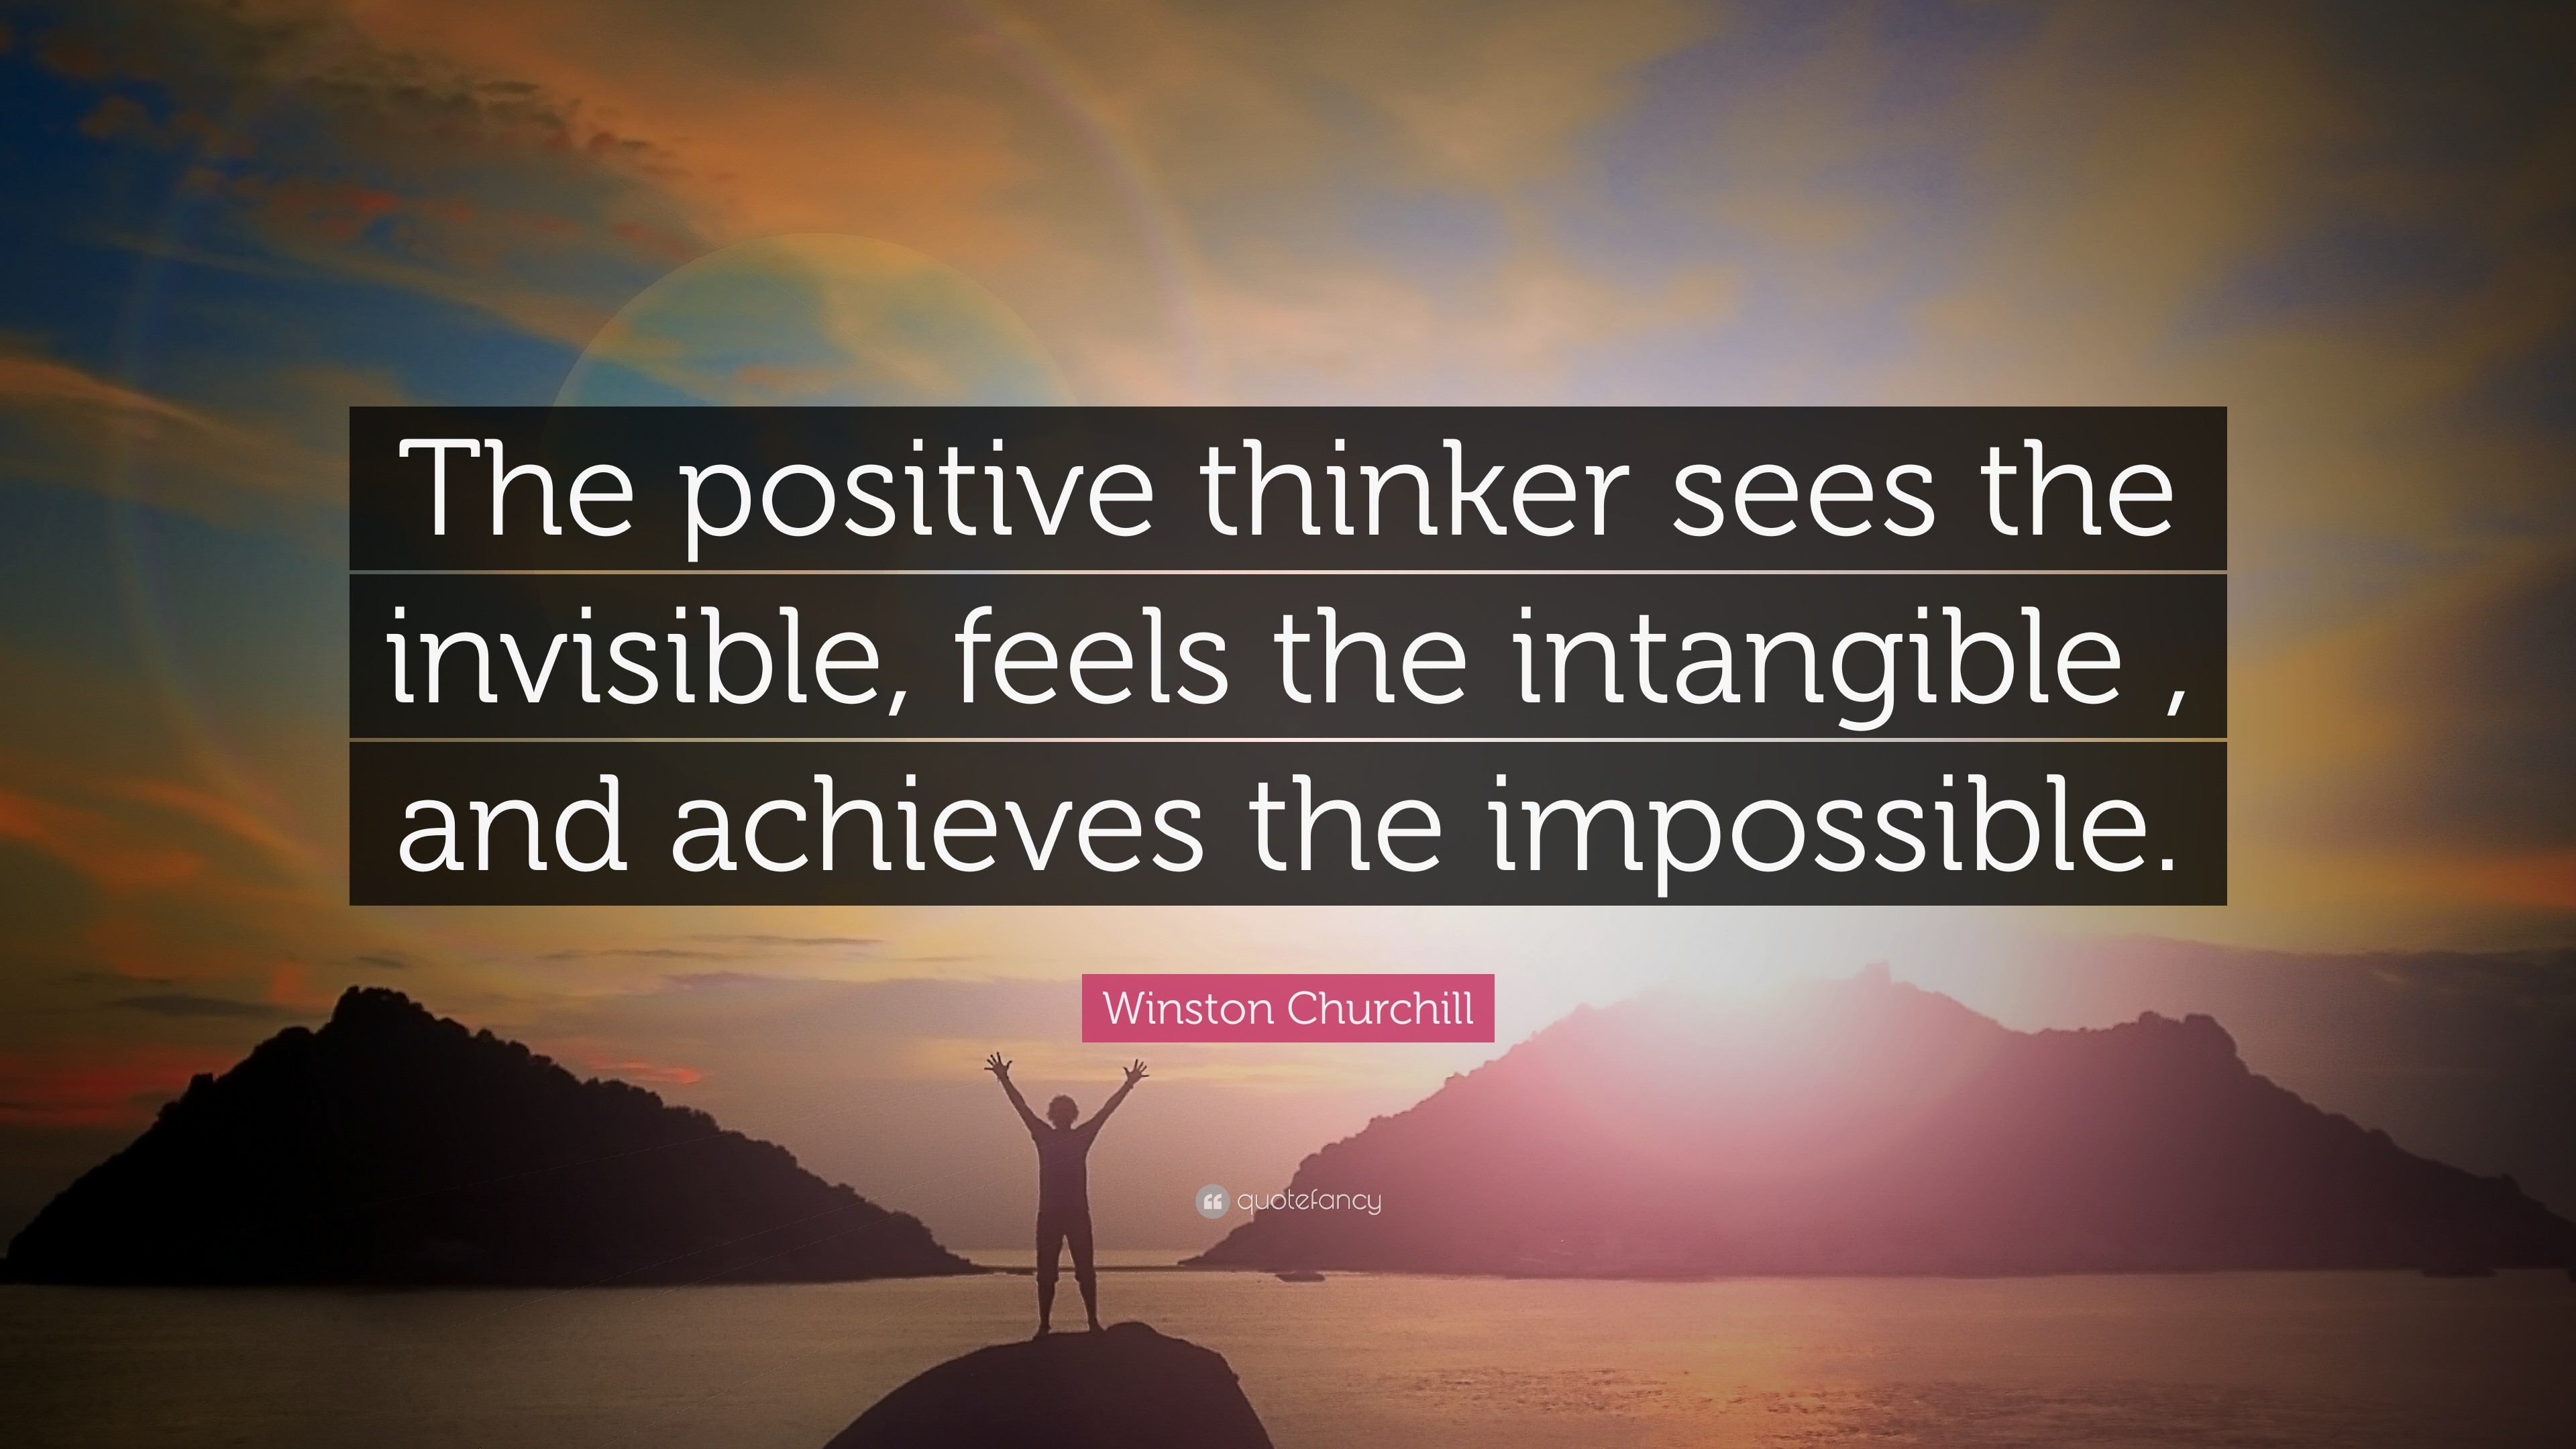 3840x2160 Positive Quotes: “The positive thinker sees the invisible, feels the  intangible , and